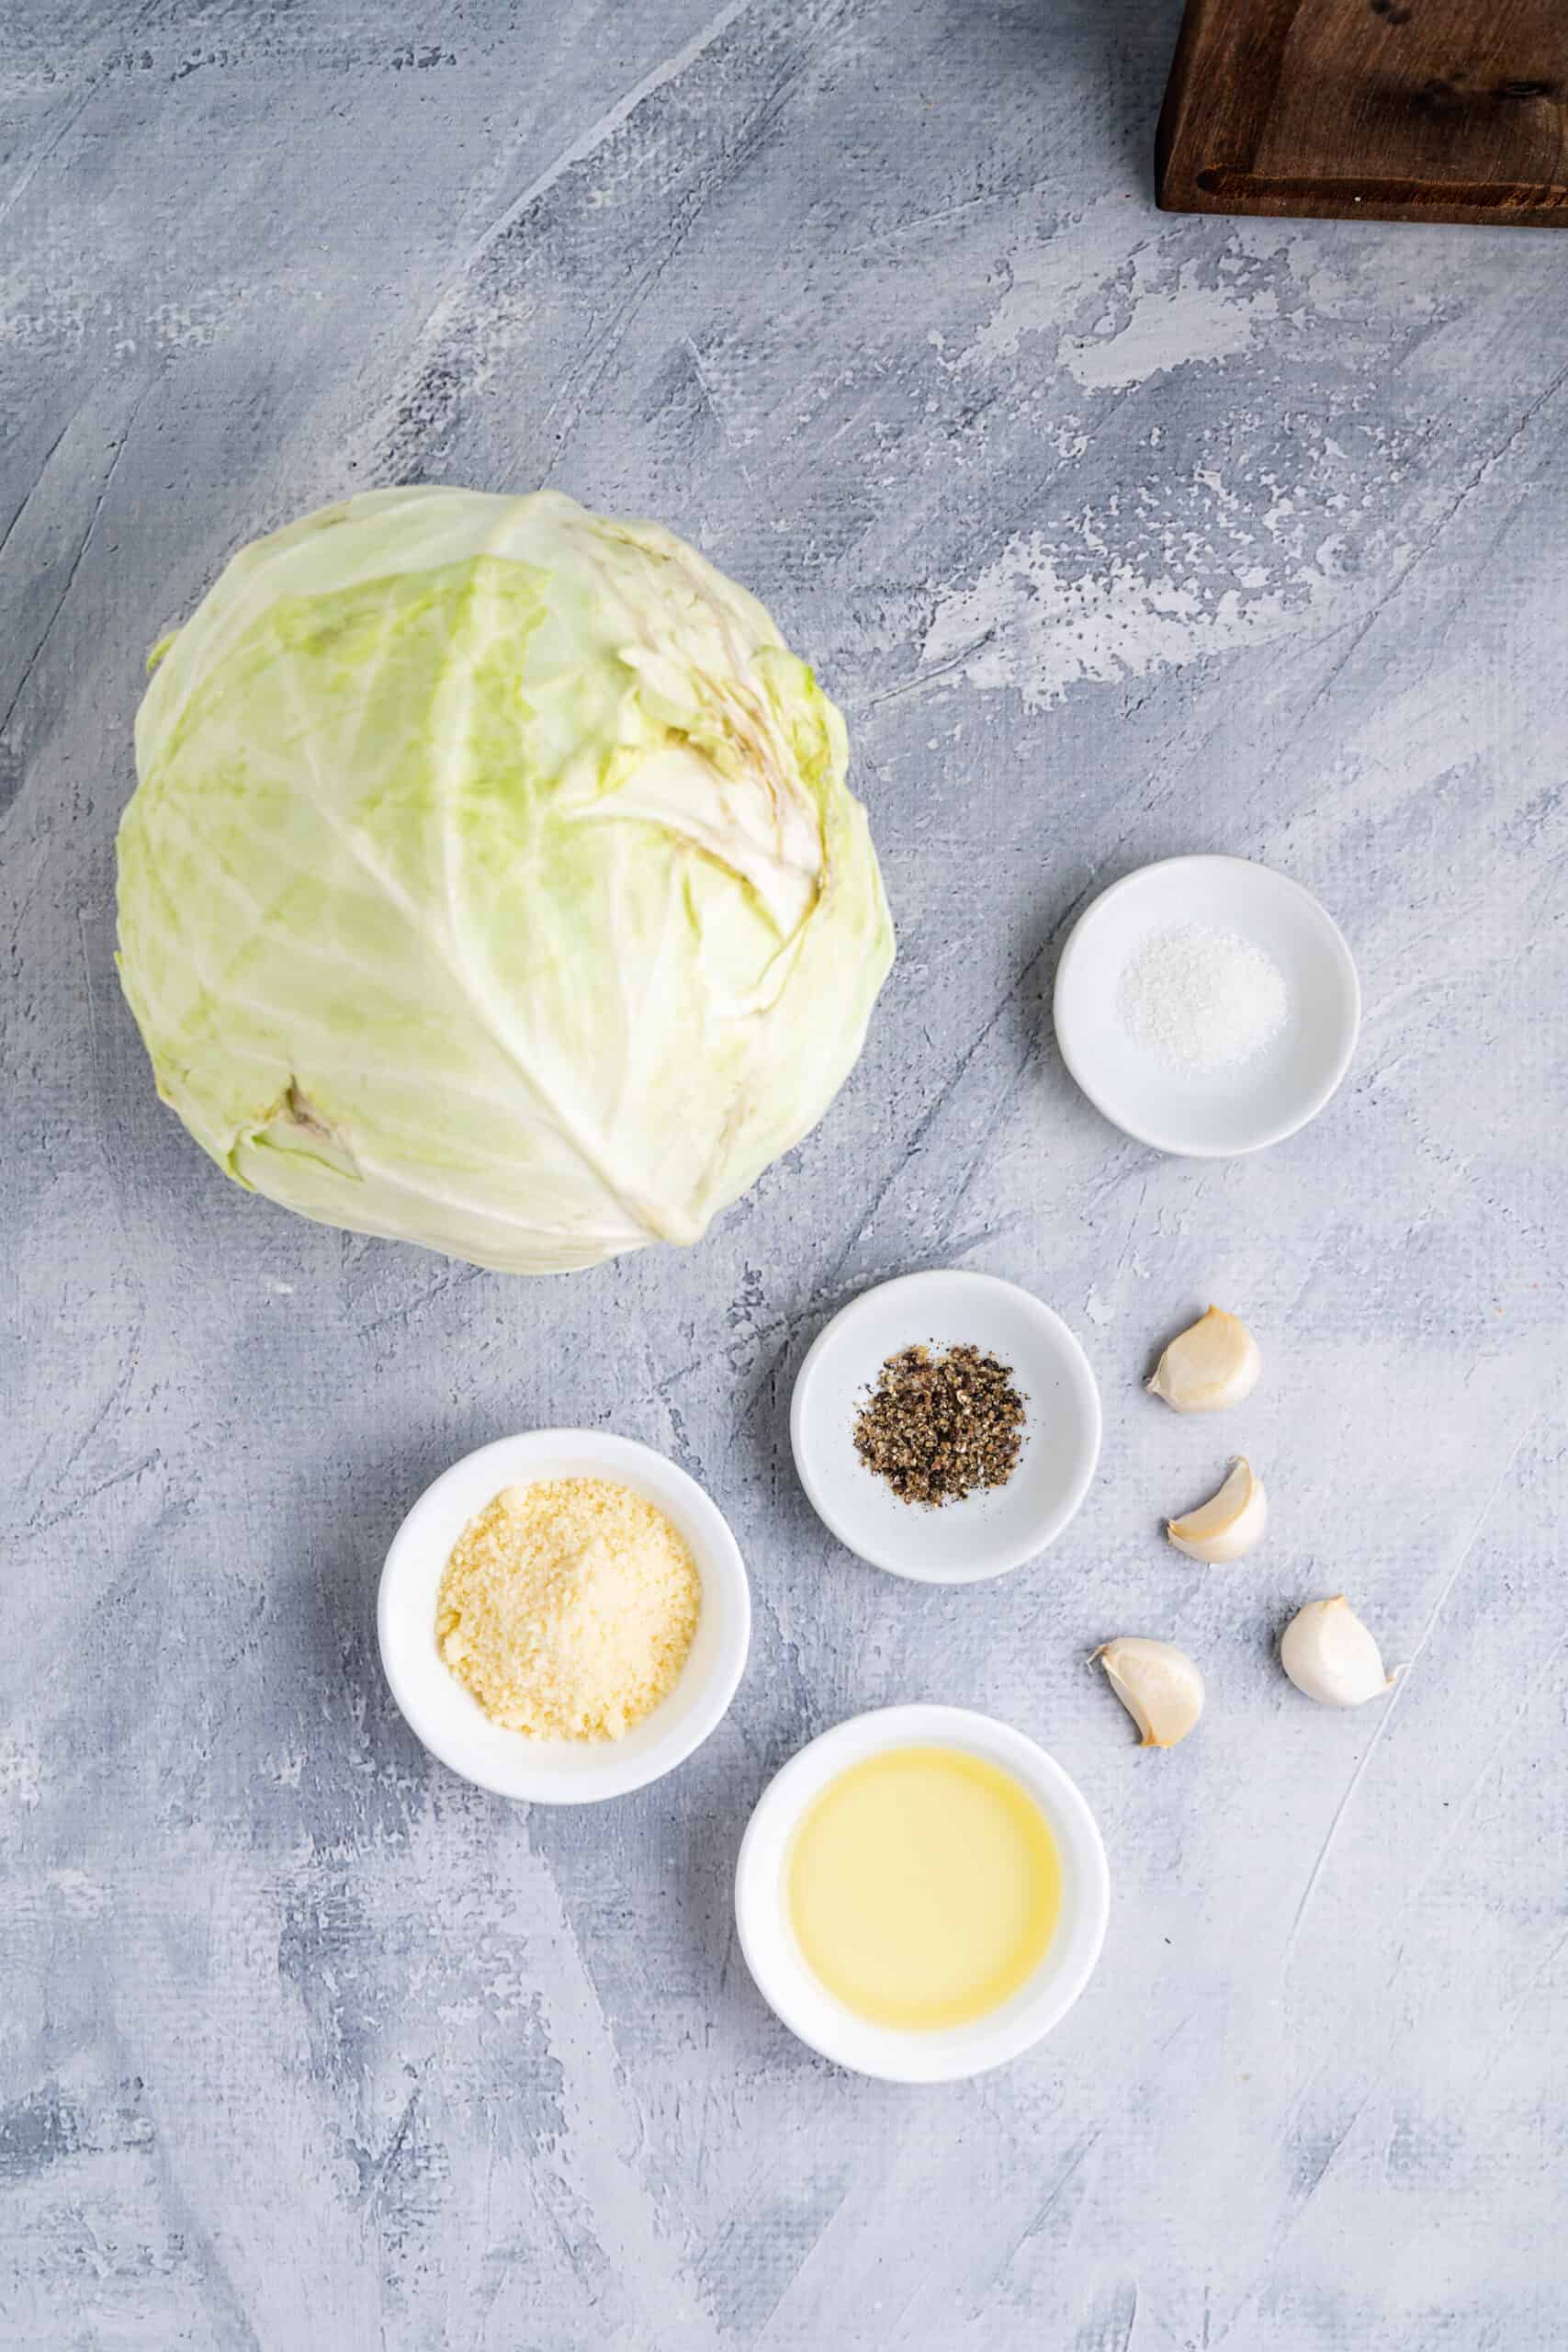 Ingredients to Roasted Cabbage